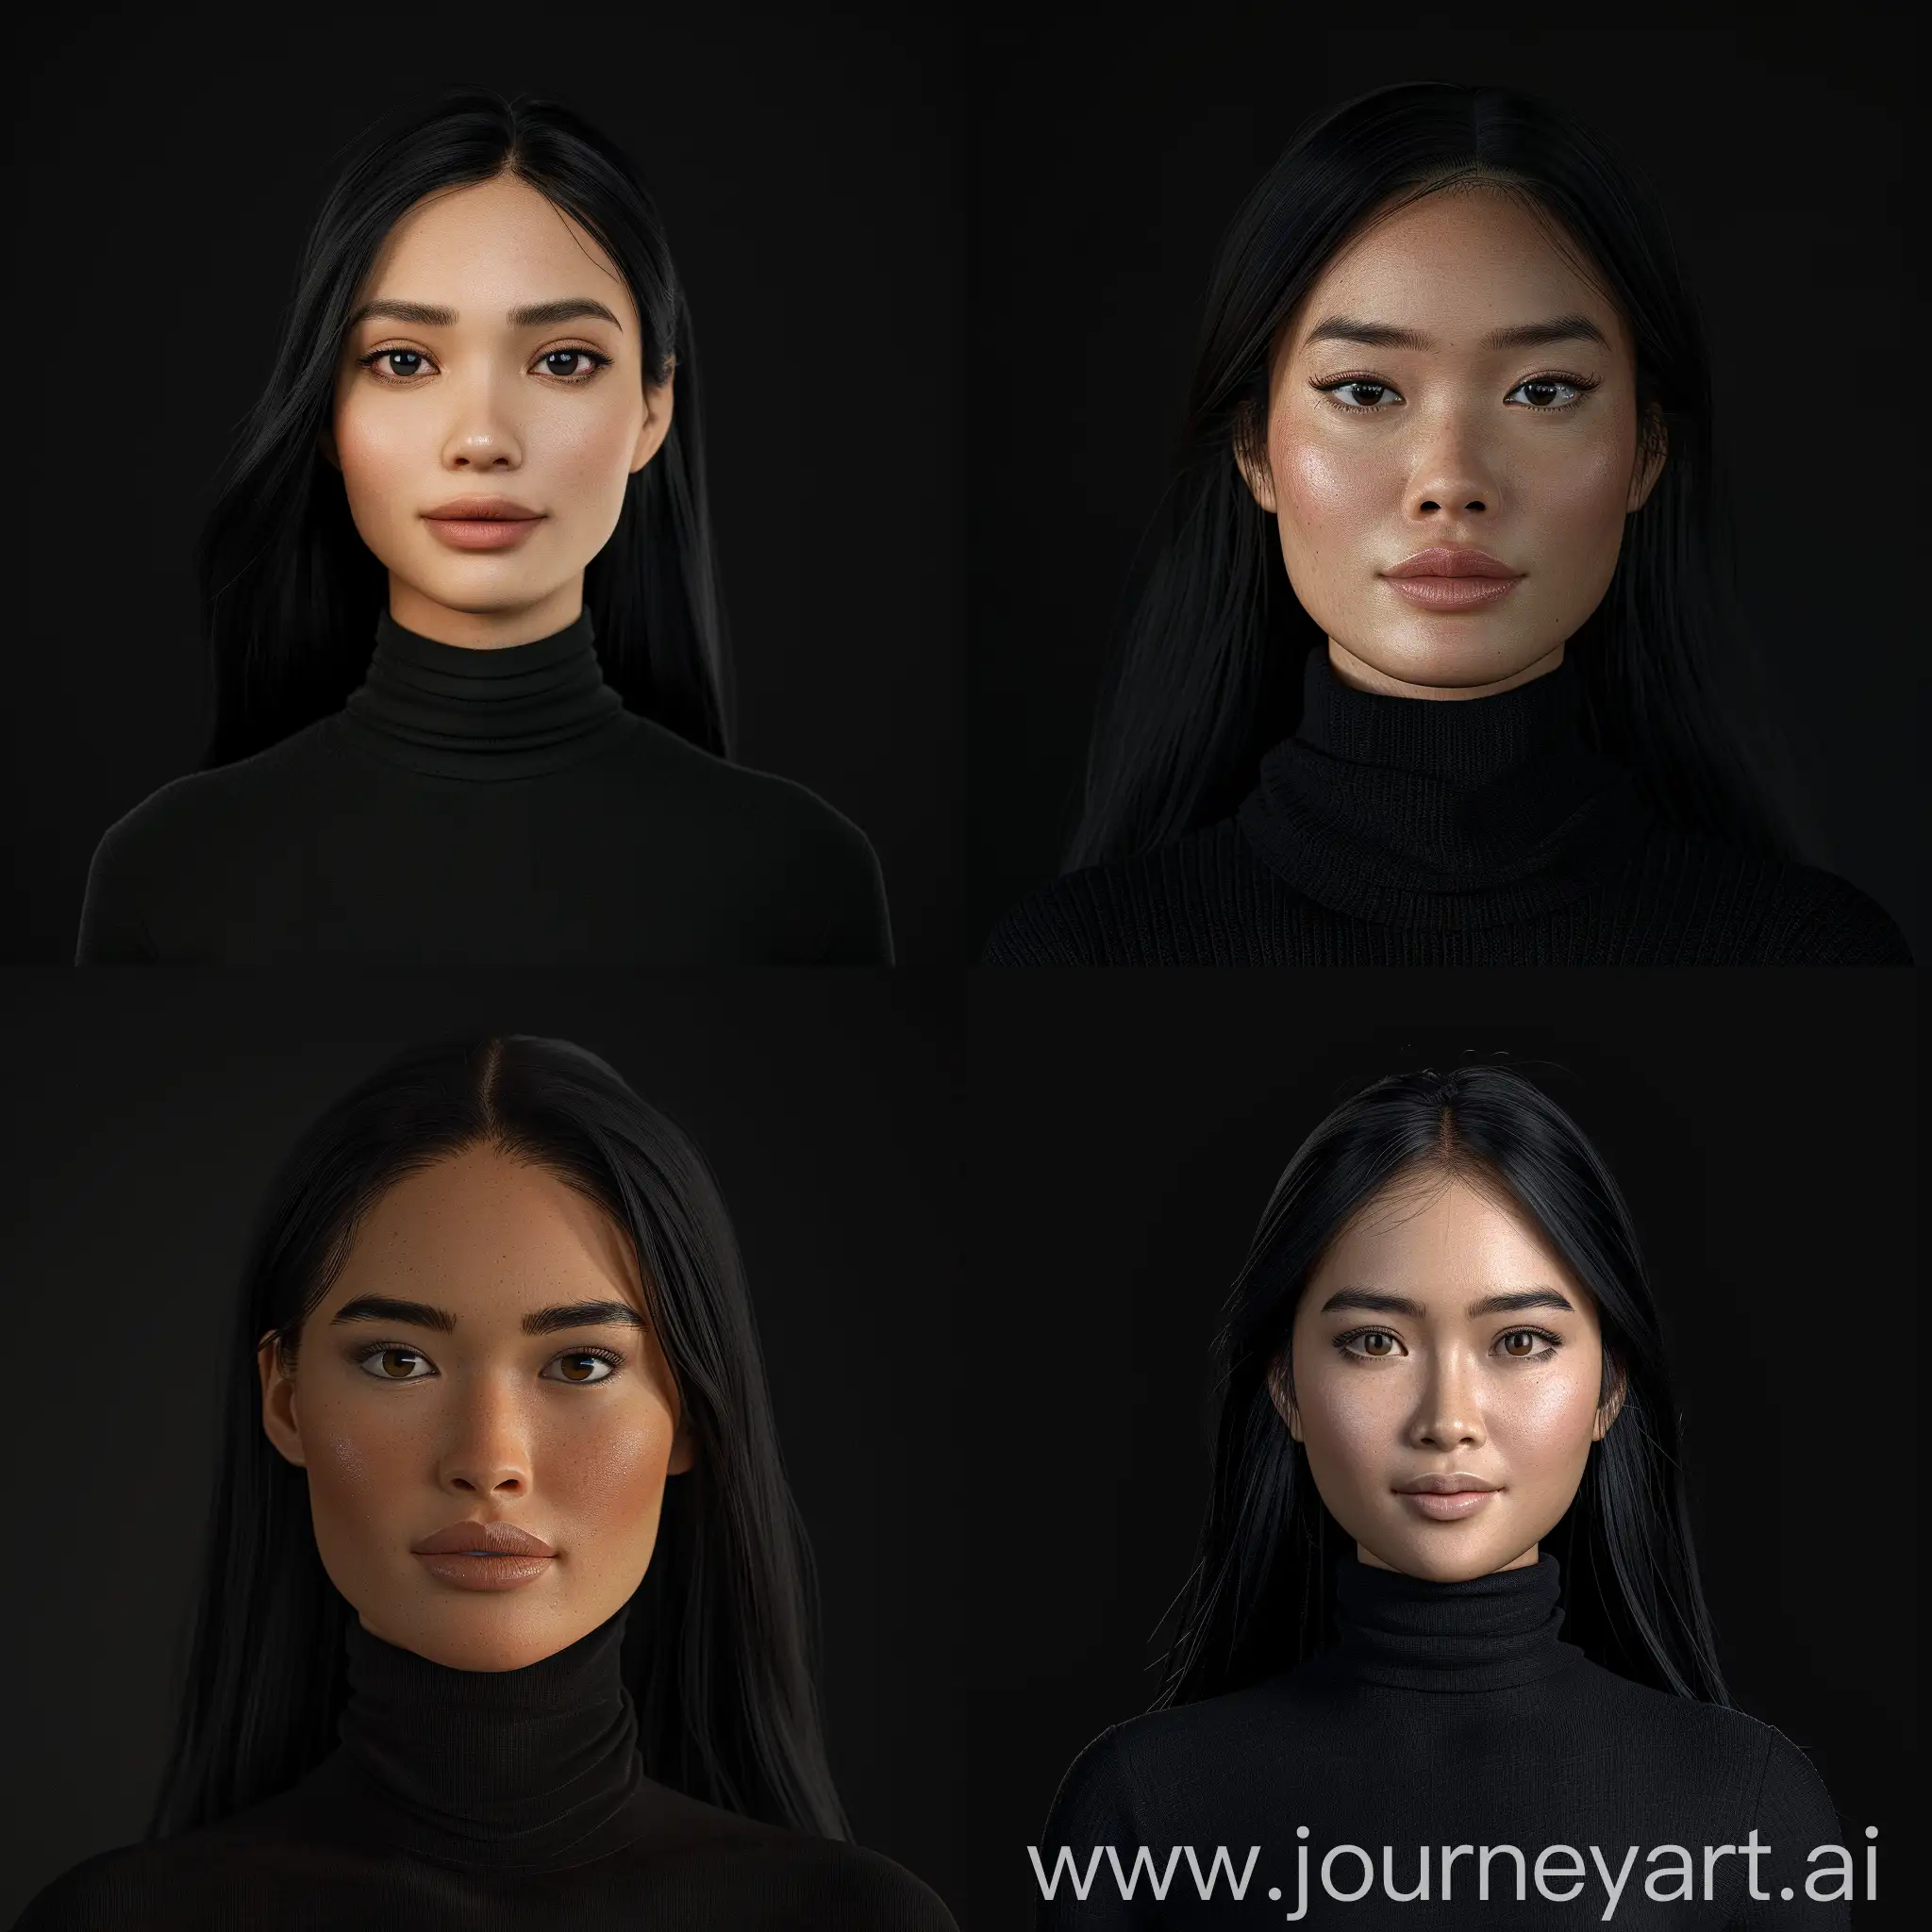 a filipina woman, realistic 3d, light skin toned, wearing black turtle neck, long black hair, neutral expression, black background